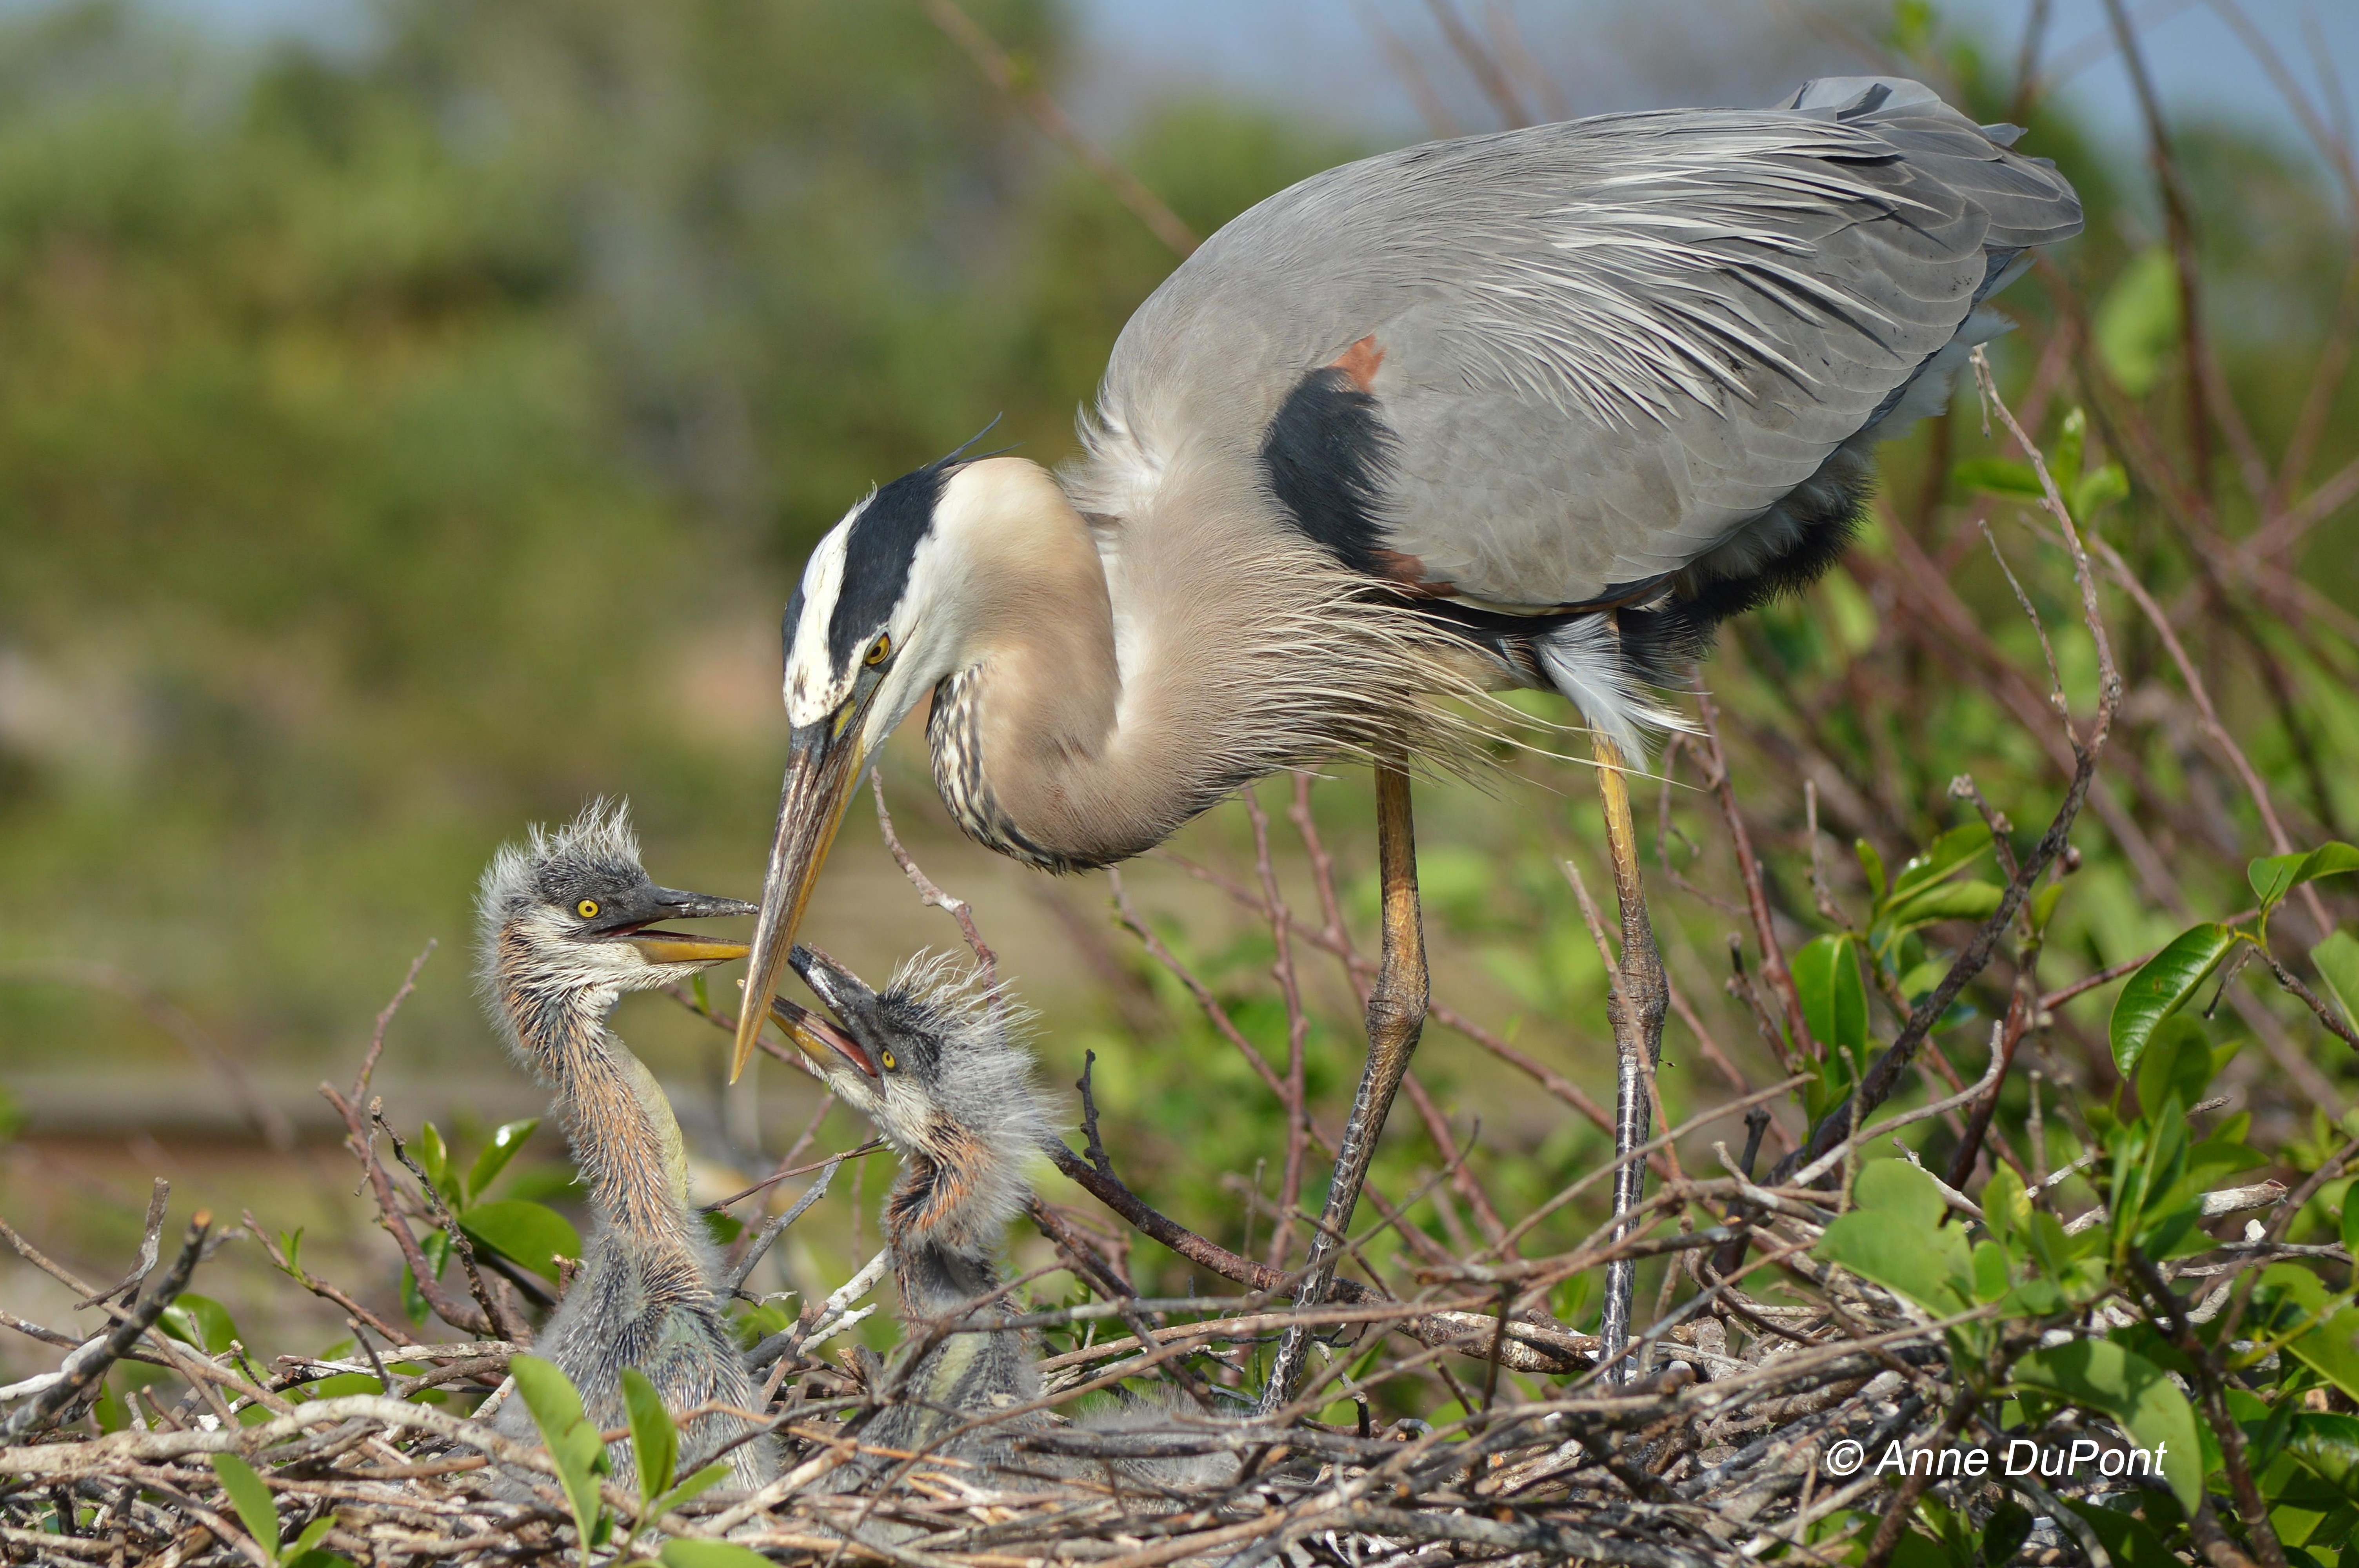 Great Blue Heron and chicks (c) 2018 Anne DuPont all rights reserved.